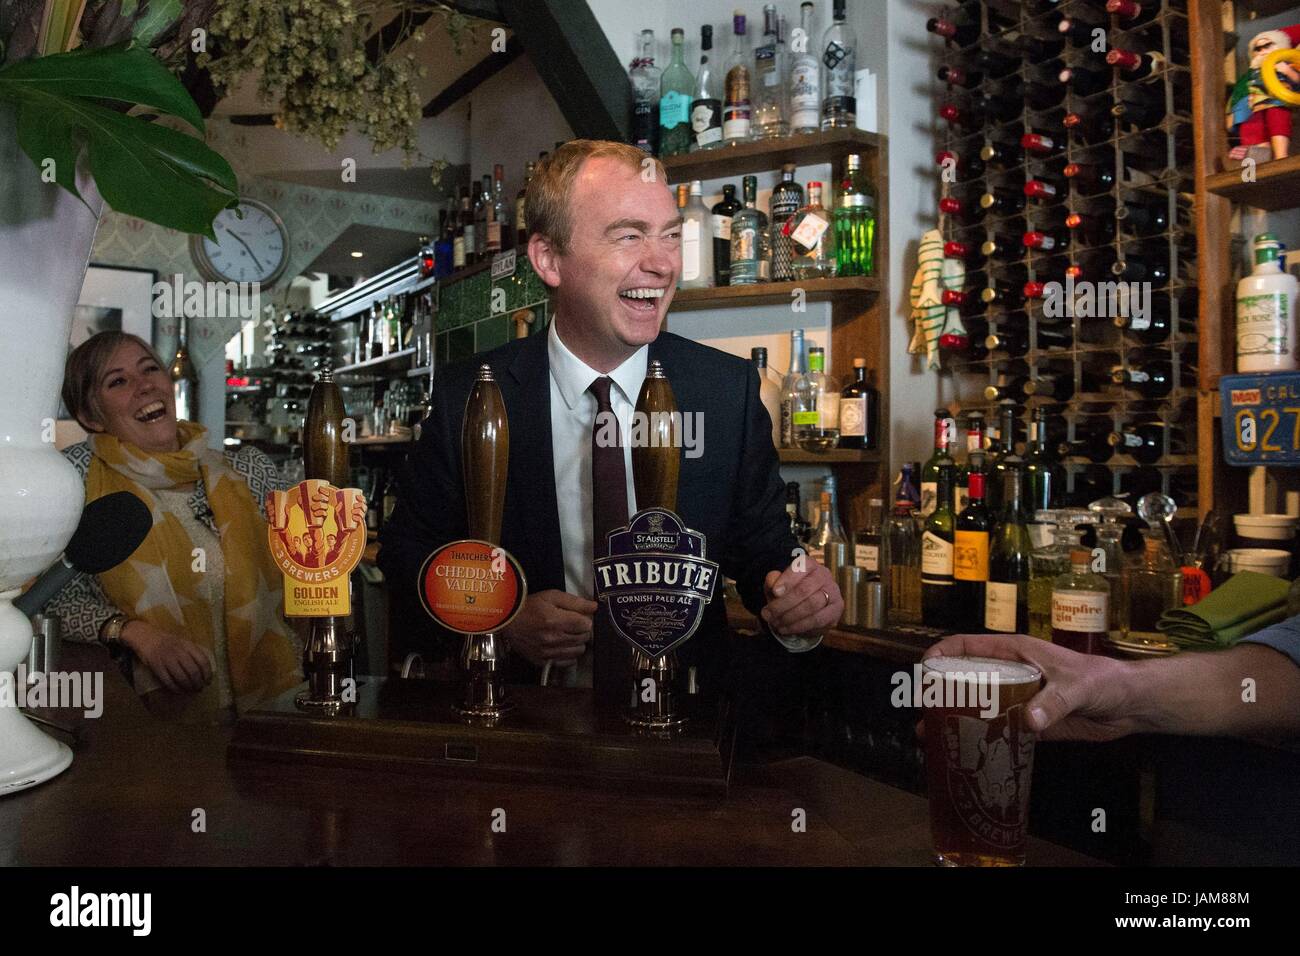 Liberal Democrats leader Tim Farron pulls a pint during a visit to Dylans The King Arms pub in St Albans, while on the General Election campaign trail. Stock Photo